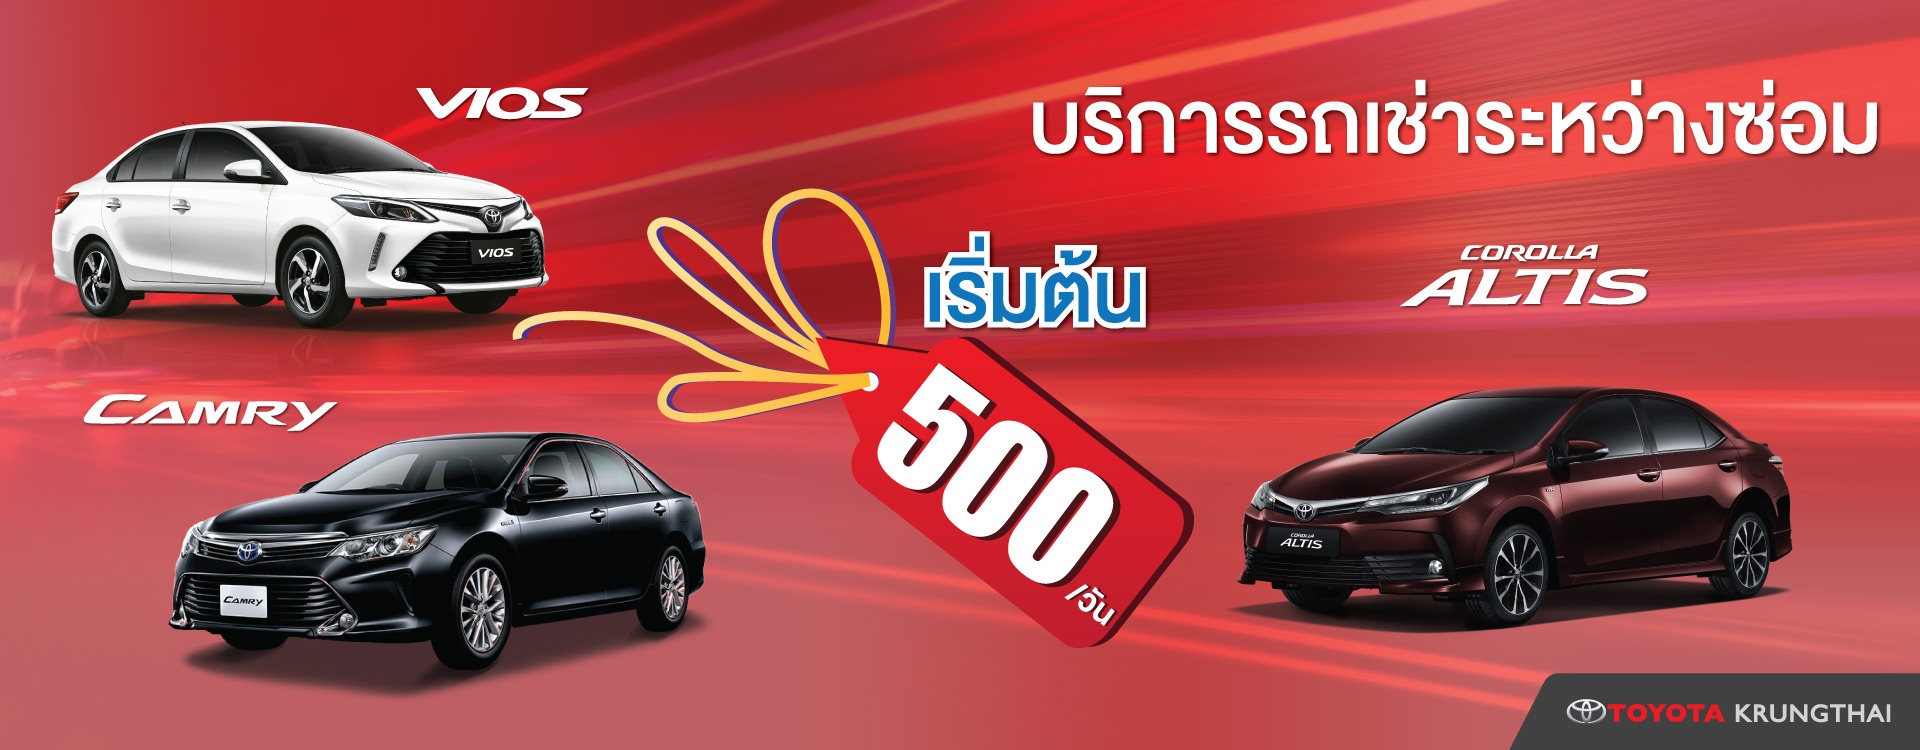 Carrent-Banner-1920x750px